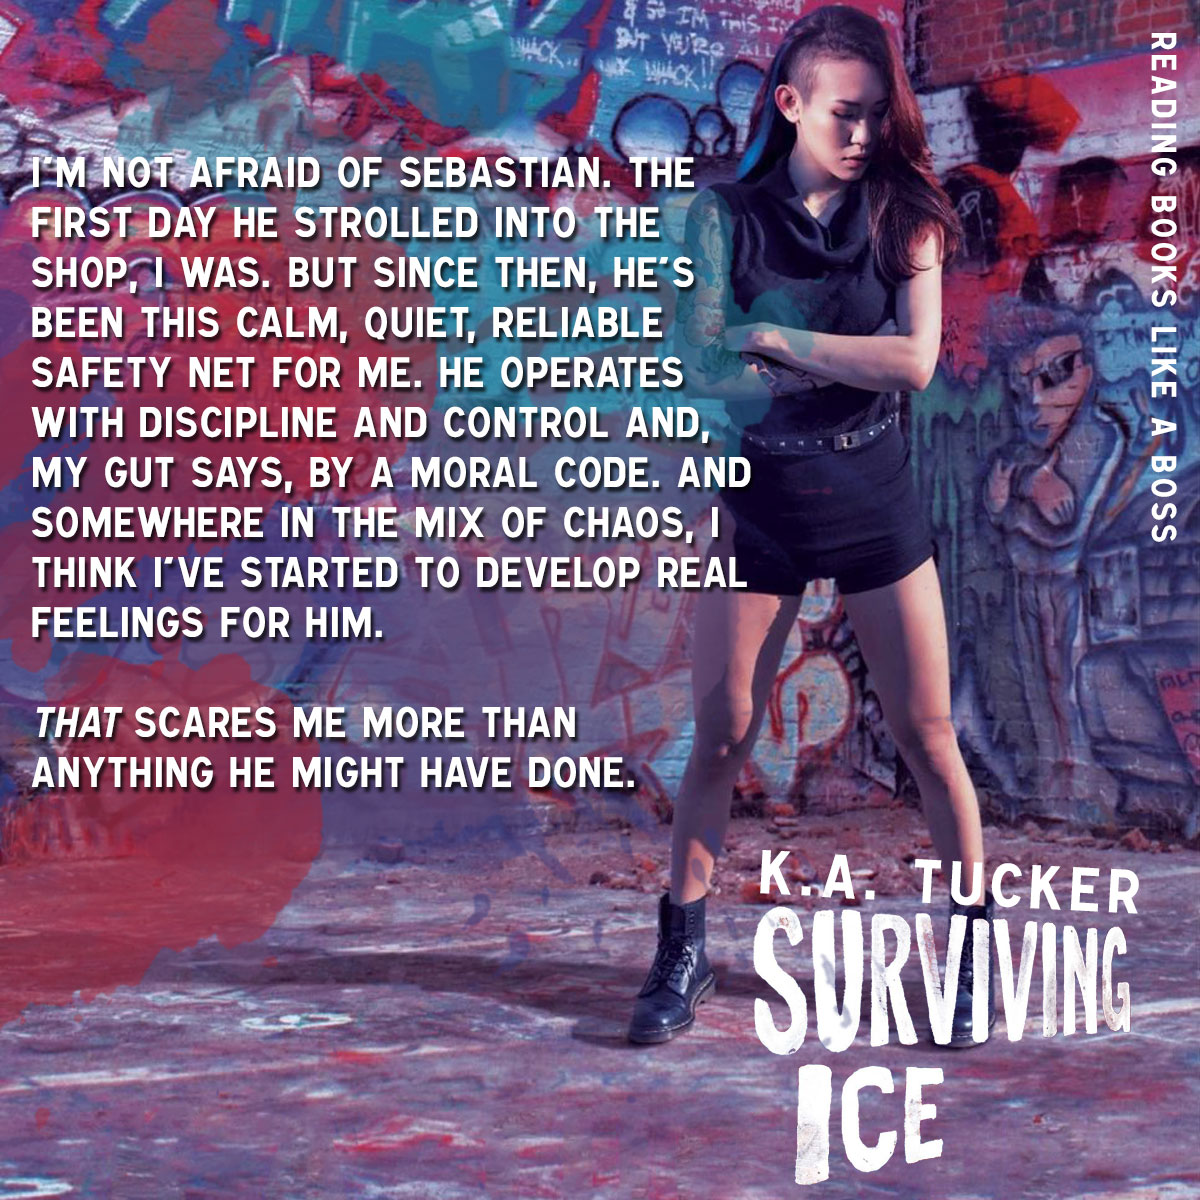 Surviving Ice by K.A. Tucker